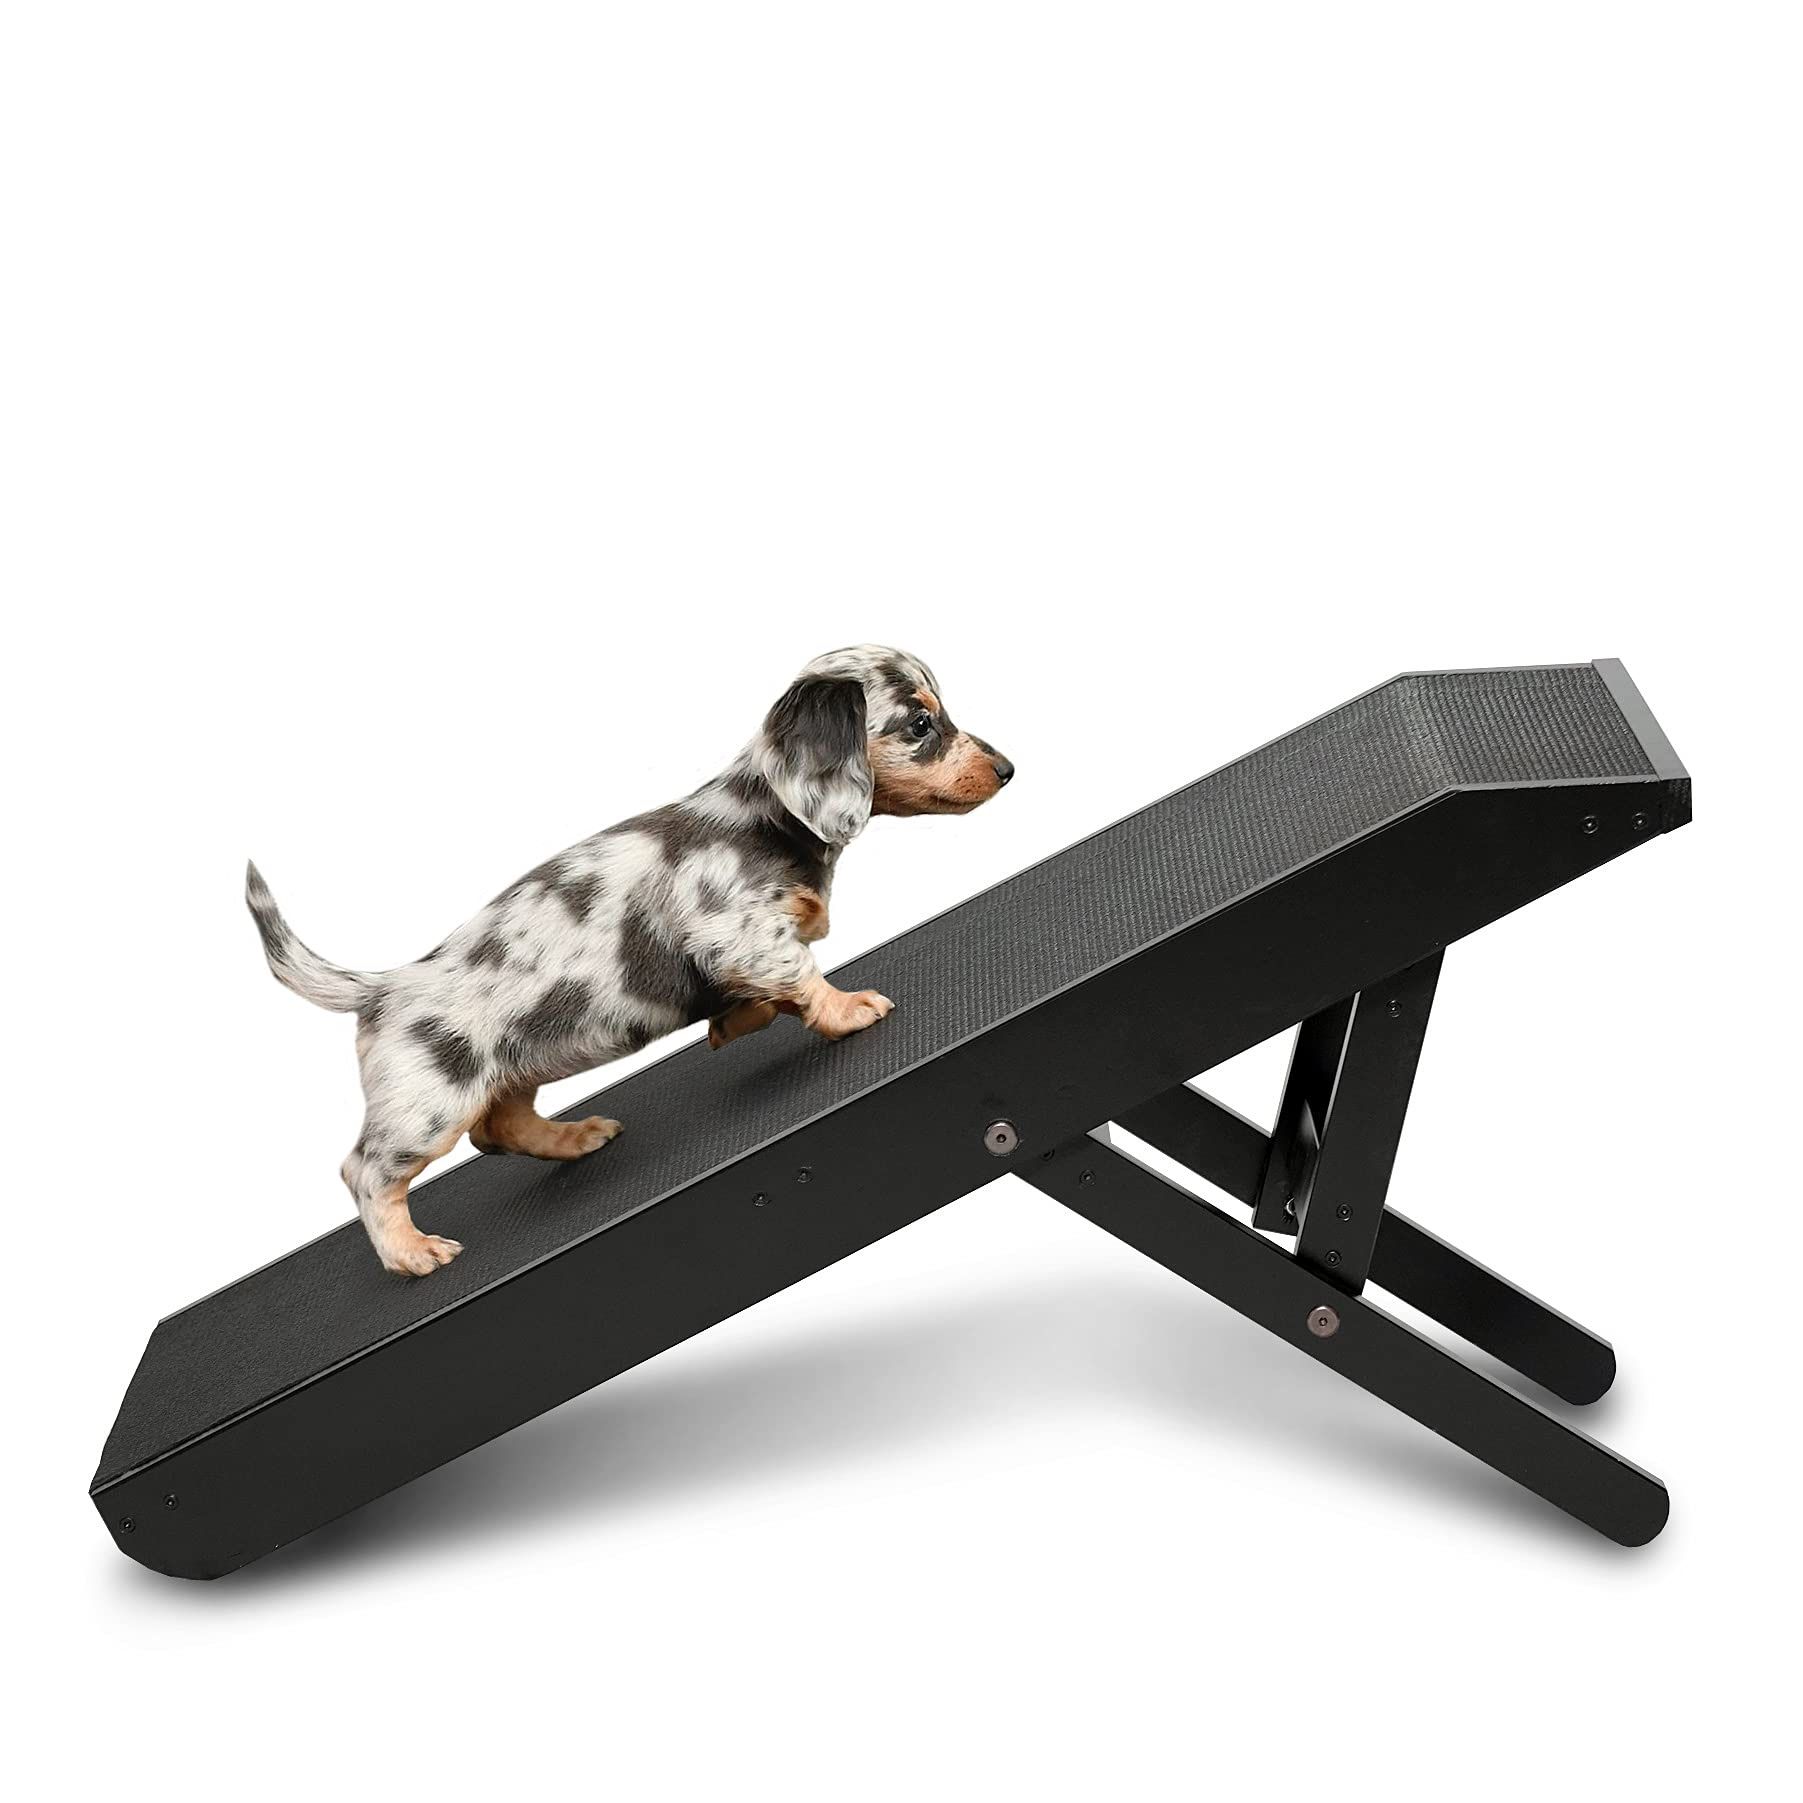 DoggoRamps - Couch Ramp For Dogs - Adjustable Height, Anti-Slip Grip Surface, For Small Dogs & Big Dogs, And 5 Colors To Match Your Furniture Jet Blac